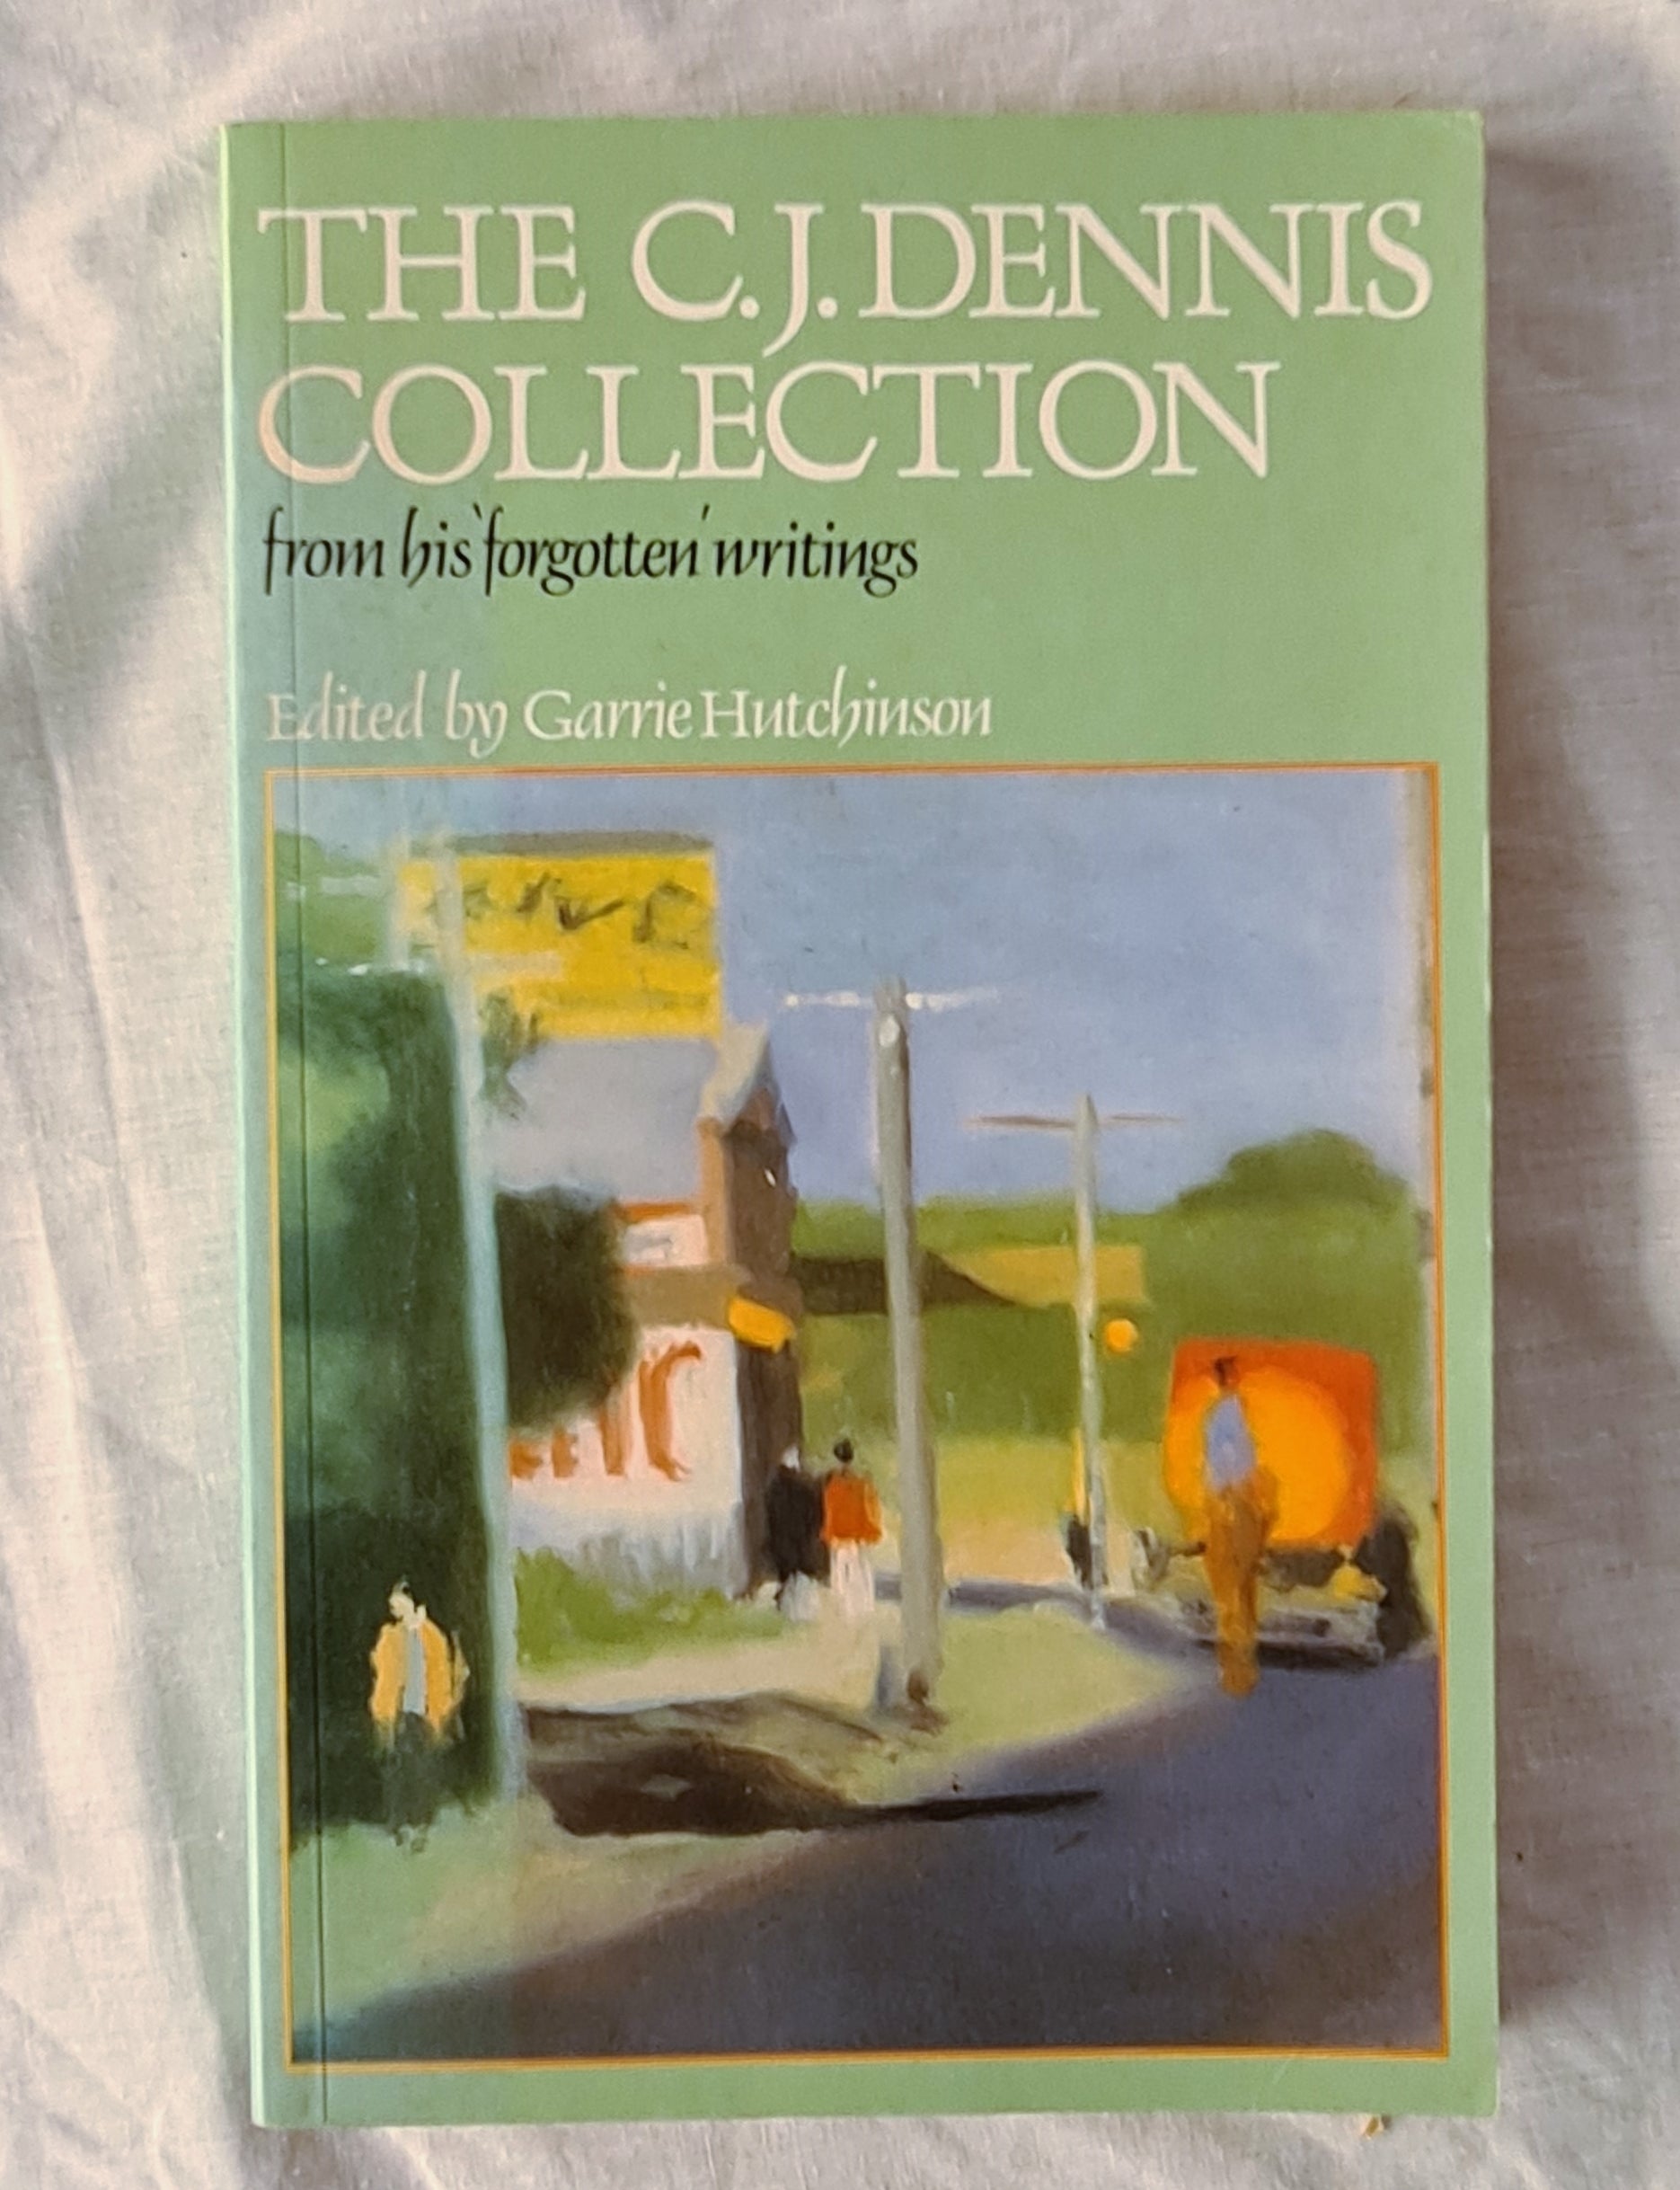 The C. J. Dennis Collection  From His ‘Forgotten’ Writings  Edited by Garrie Hutchinson